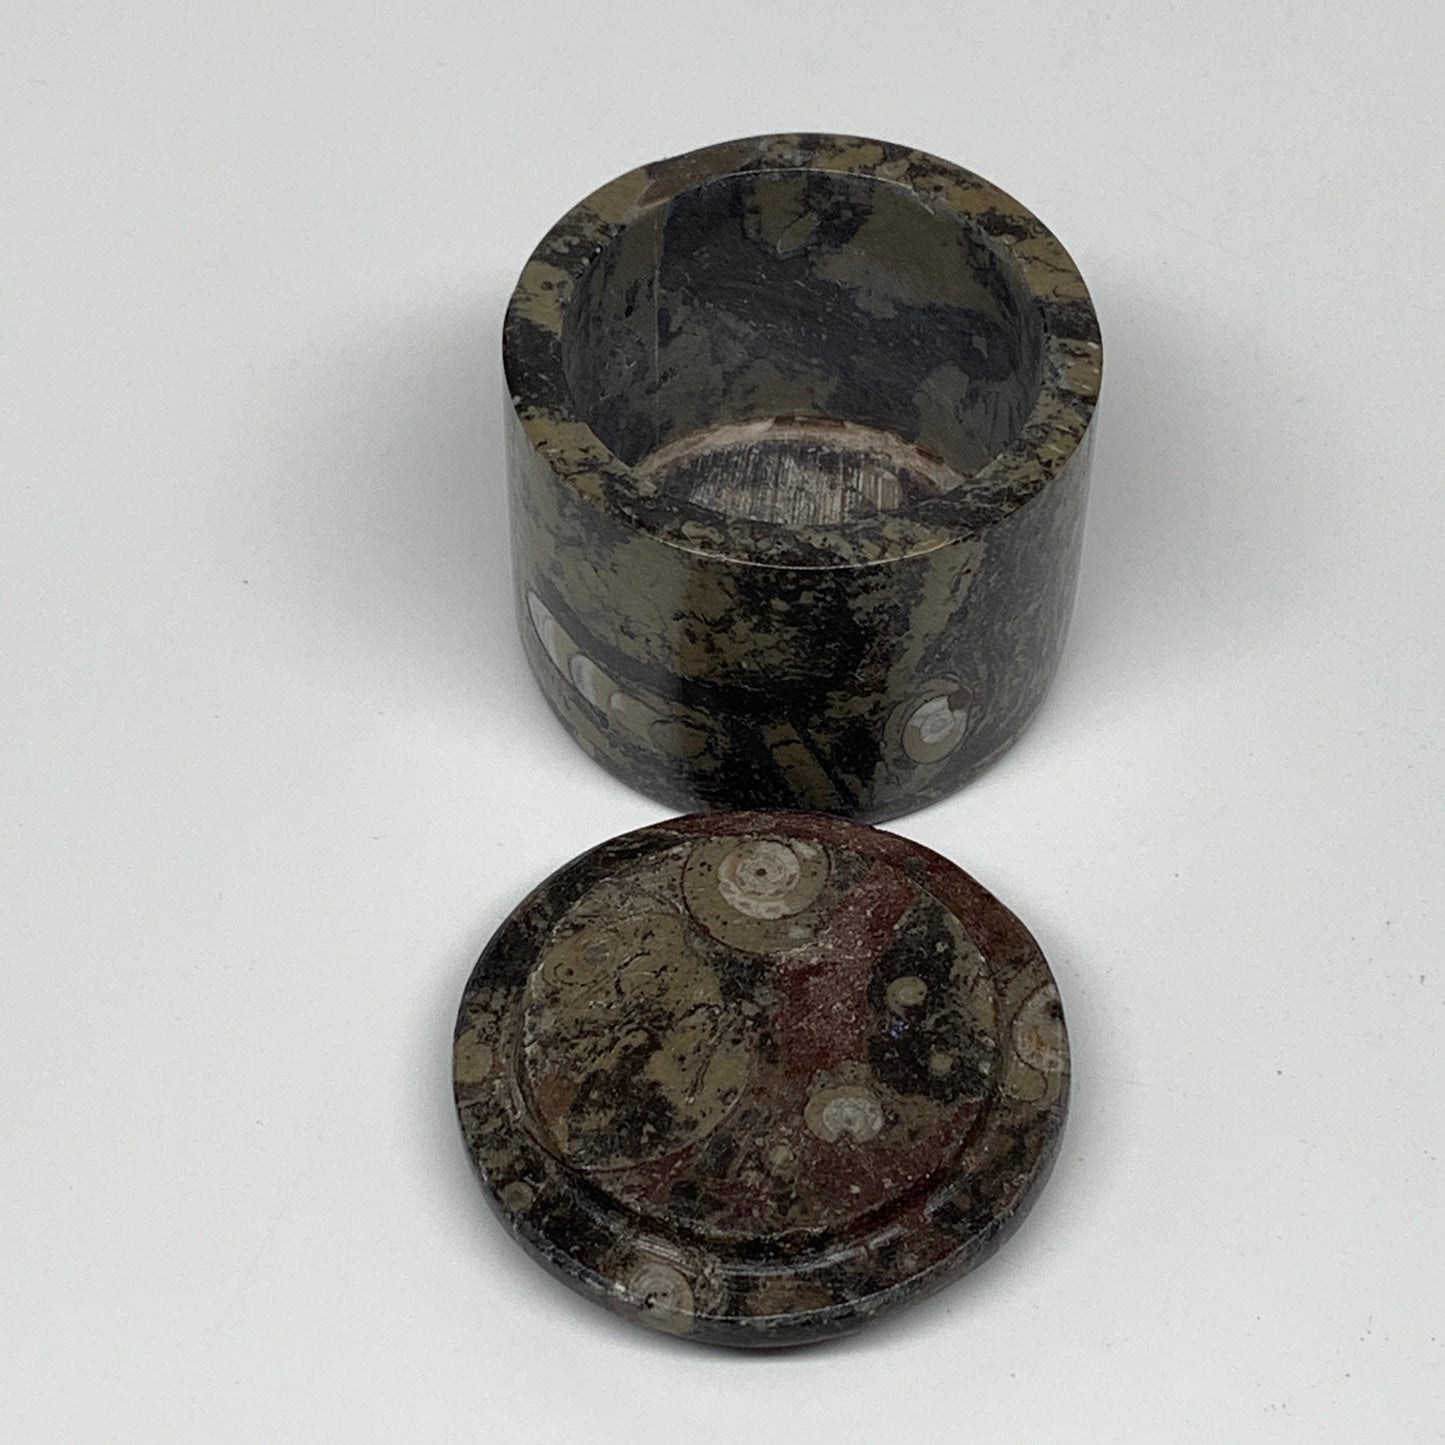 217.9g, 2.1"x2.4" Brown Fossils Ammonite Jewelry Box from Morocco, F2471